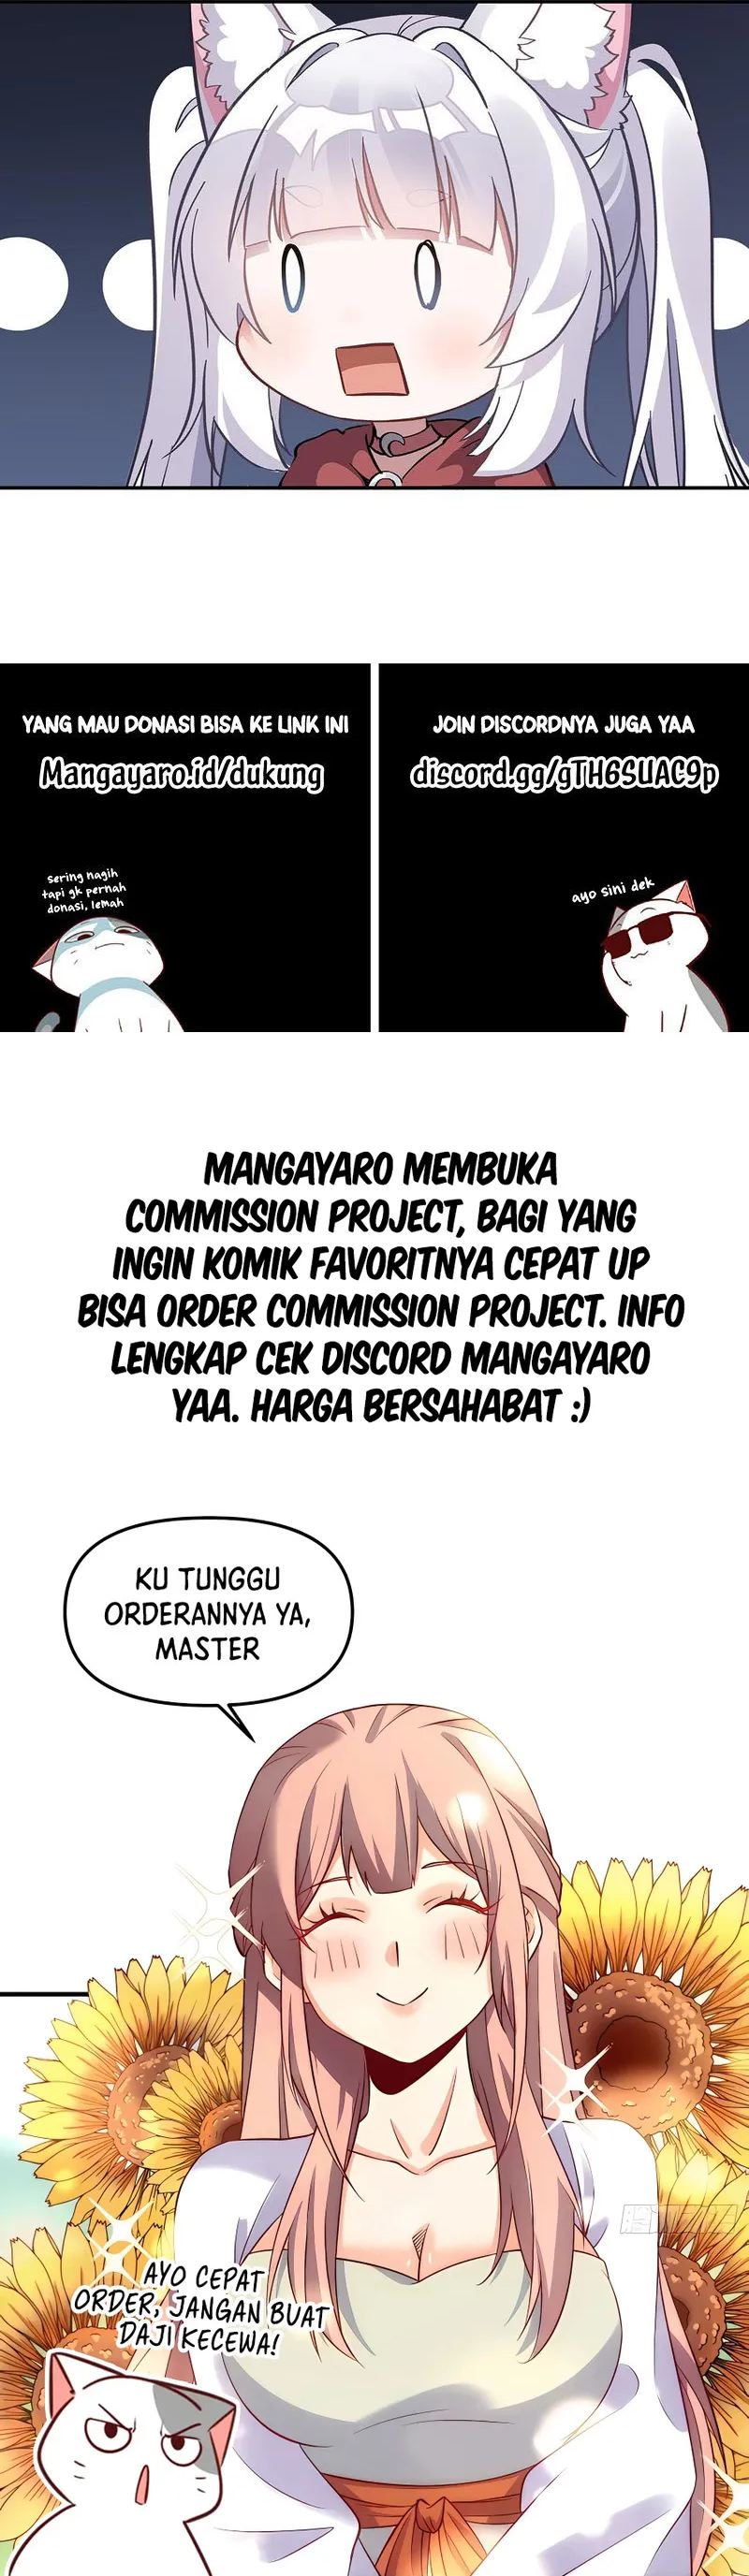 Dilarang COPAS - situs resmi www.mangacanblog.com - Komik my female apprentices are all big shots from the future 233 - chapter 233 234 Indonesia my female apprentices are all big shots from the future 233 - chapter 233 Terbaru 11|Baca Manga Komik Indonesia|Mangacan